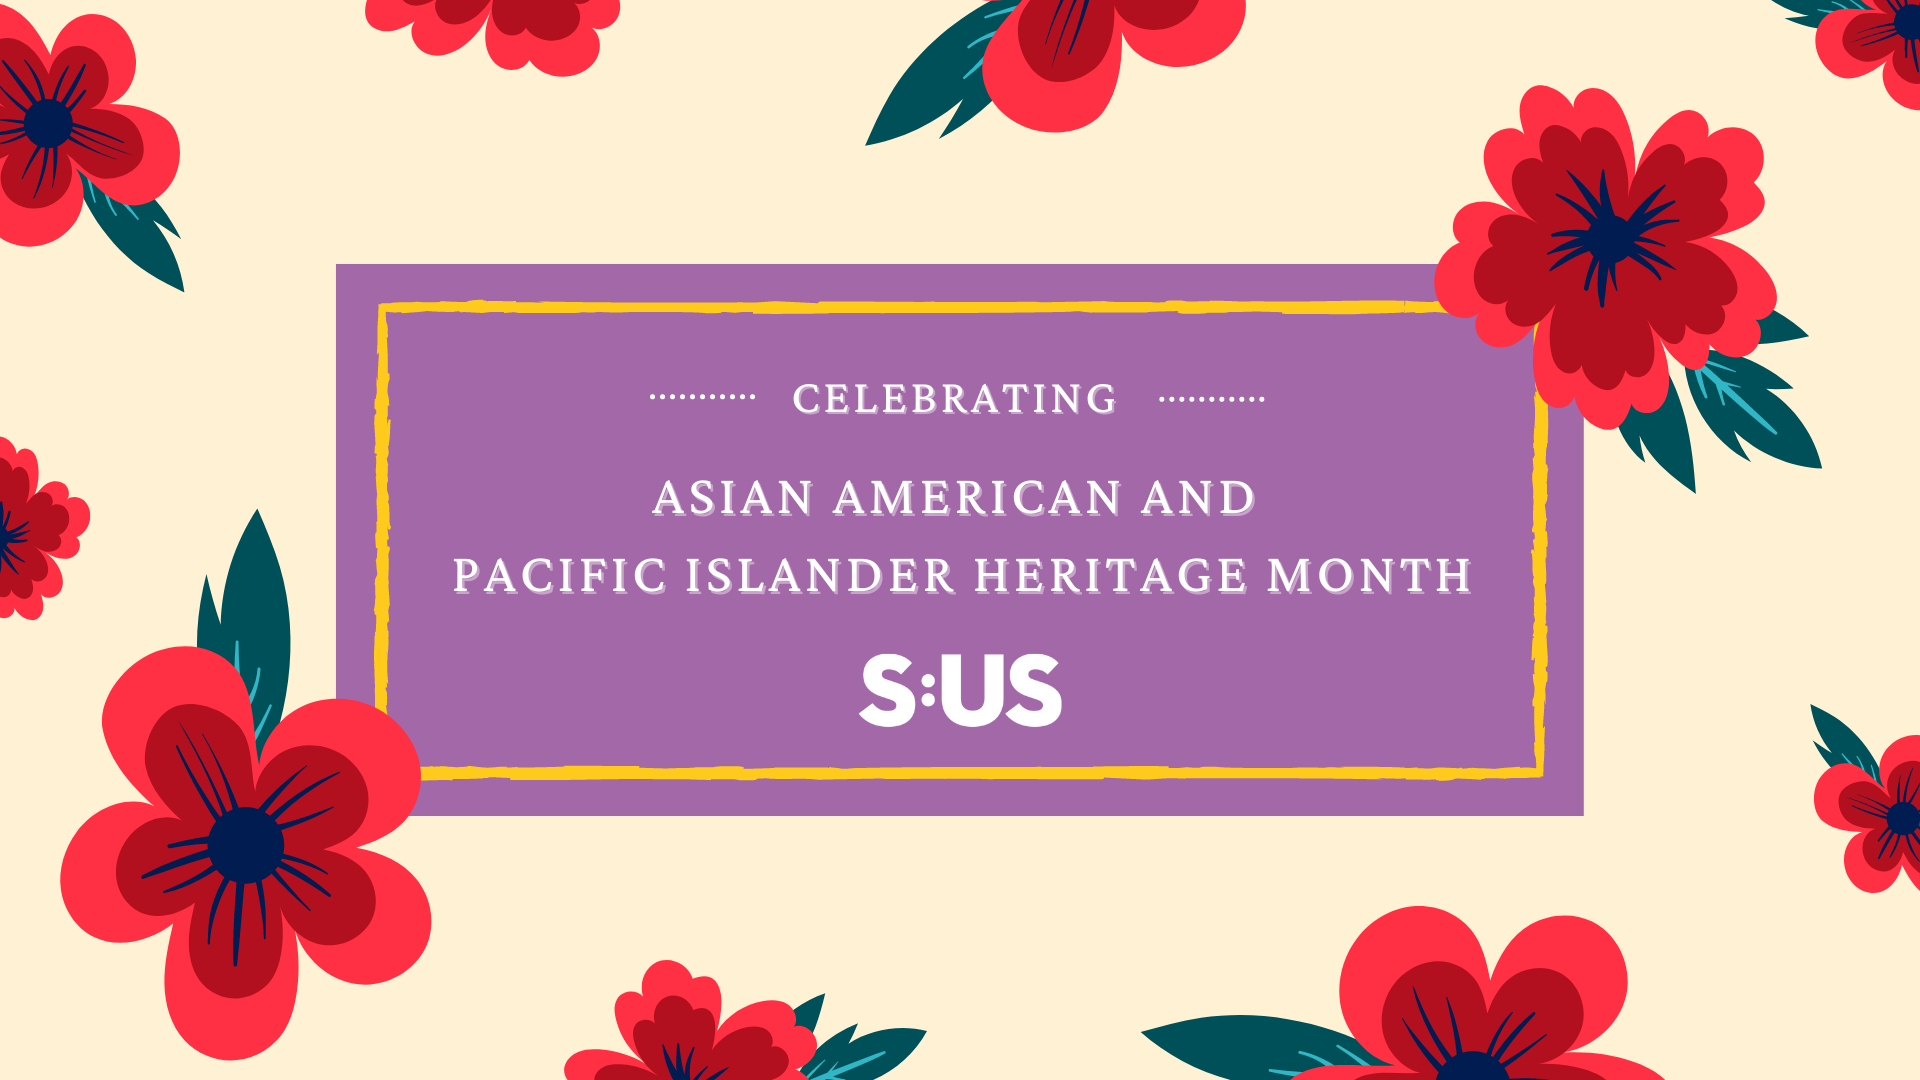 Commemorating Asian American and Pacific Islander Heritage Month